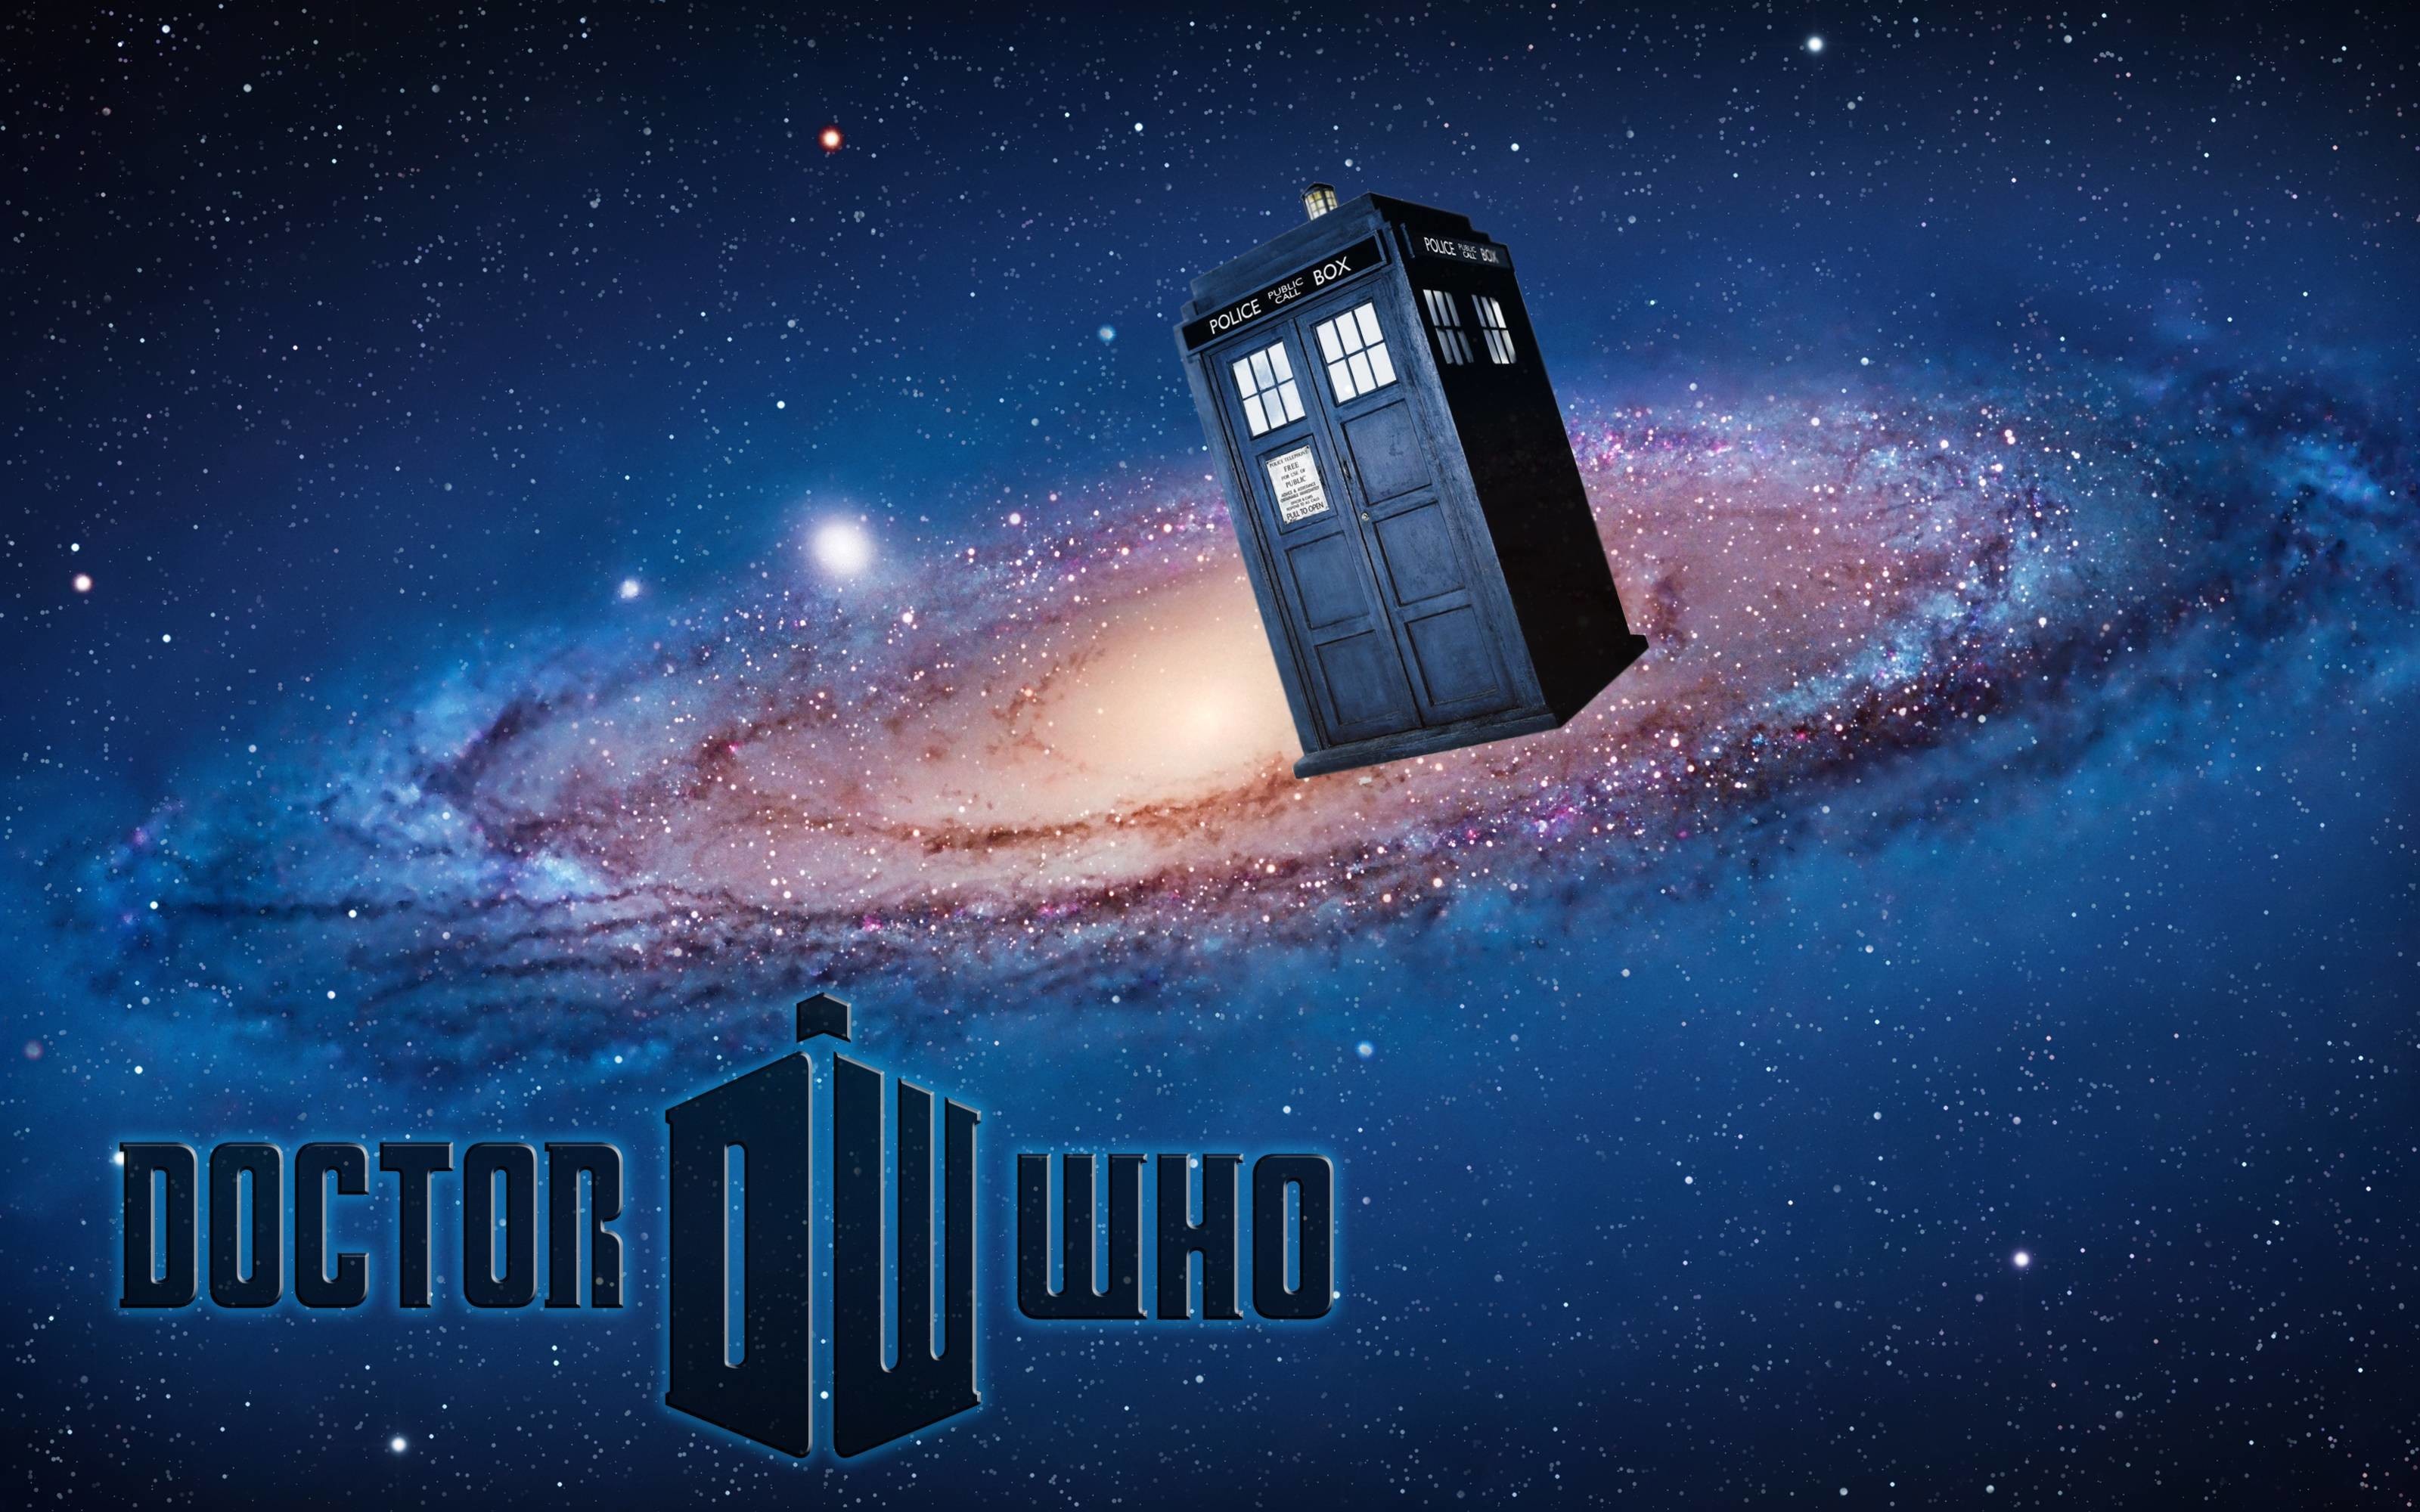 3200x2000  Doctor Who TARDIS Wallpaper (Mac) by iPhoneWallpapers on  DeviantArt